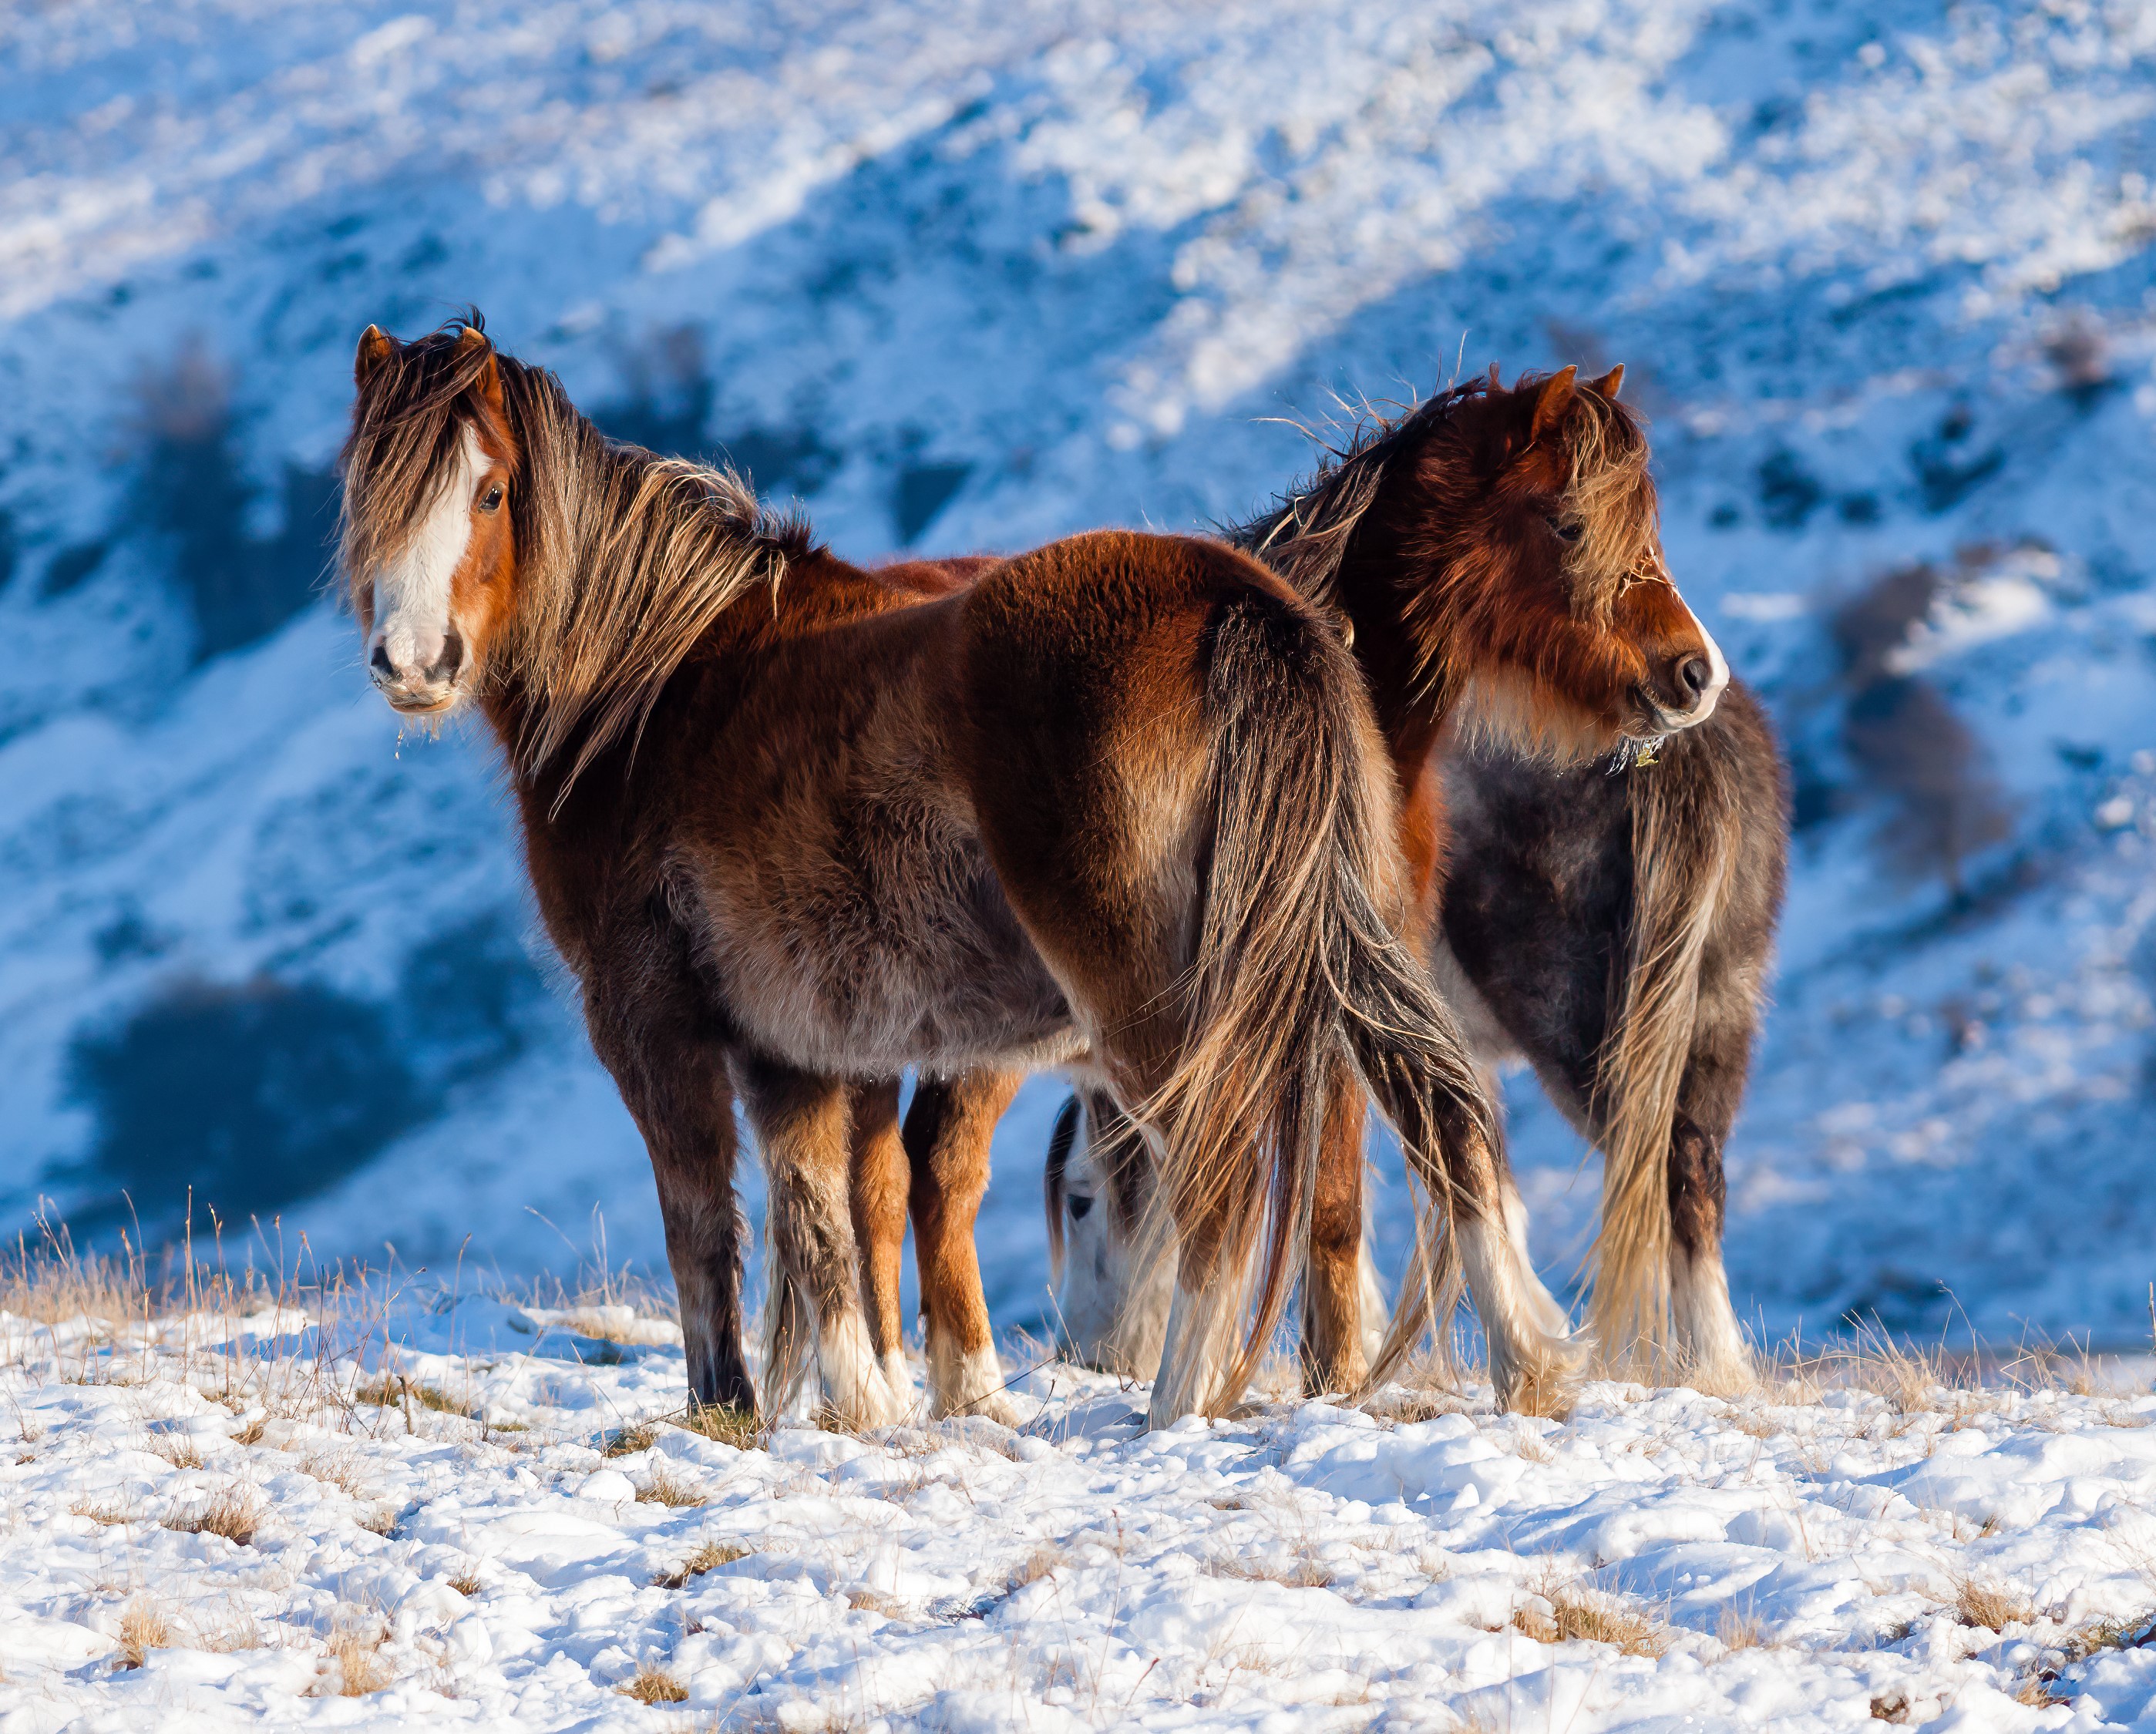 Wild Welsh ponies in a snowy landscape looking relaxed and confident.